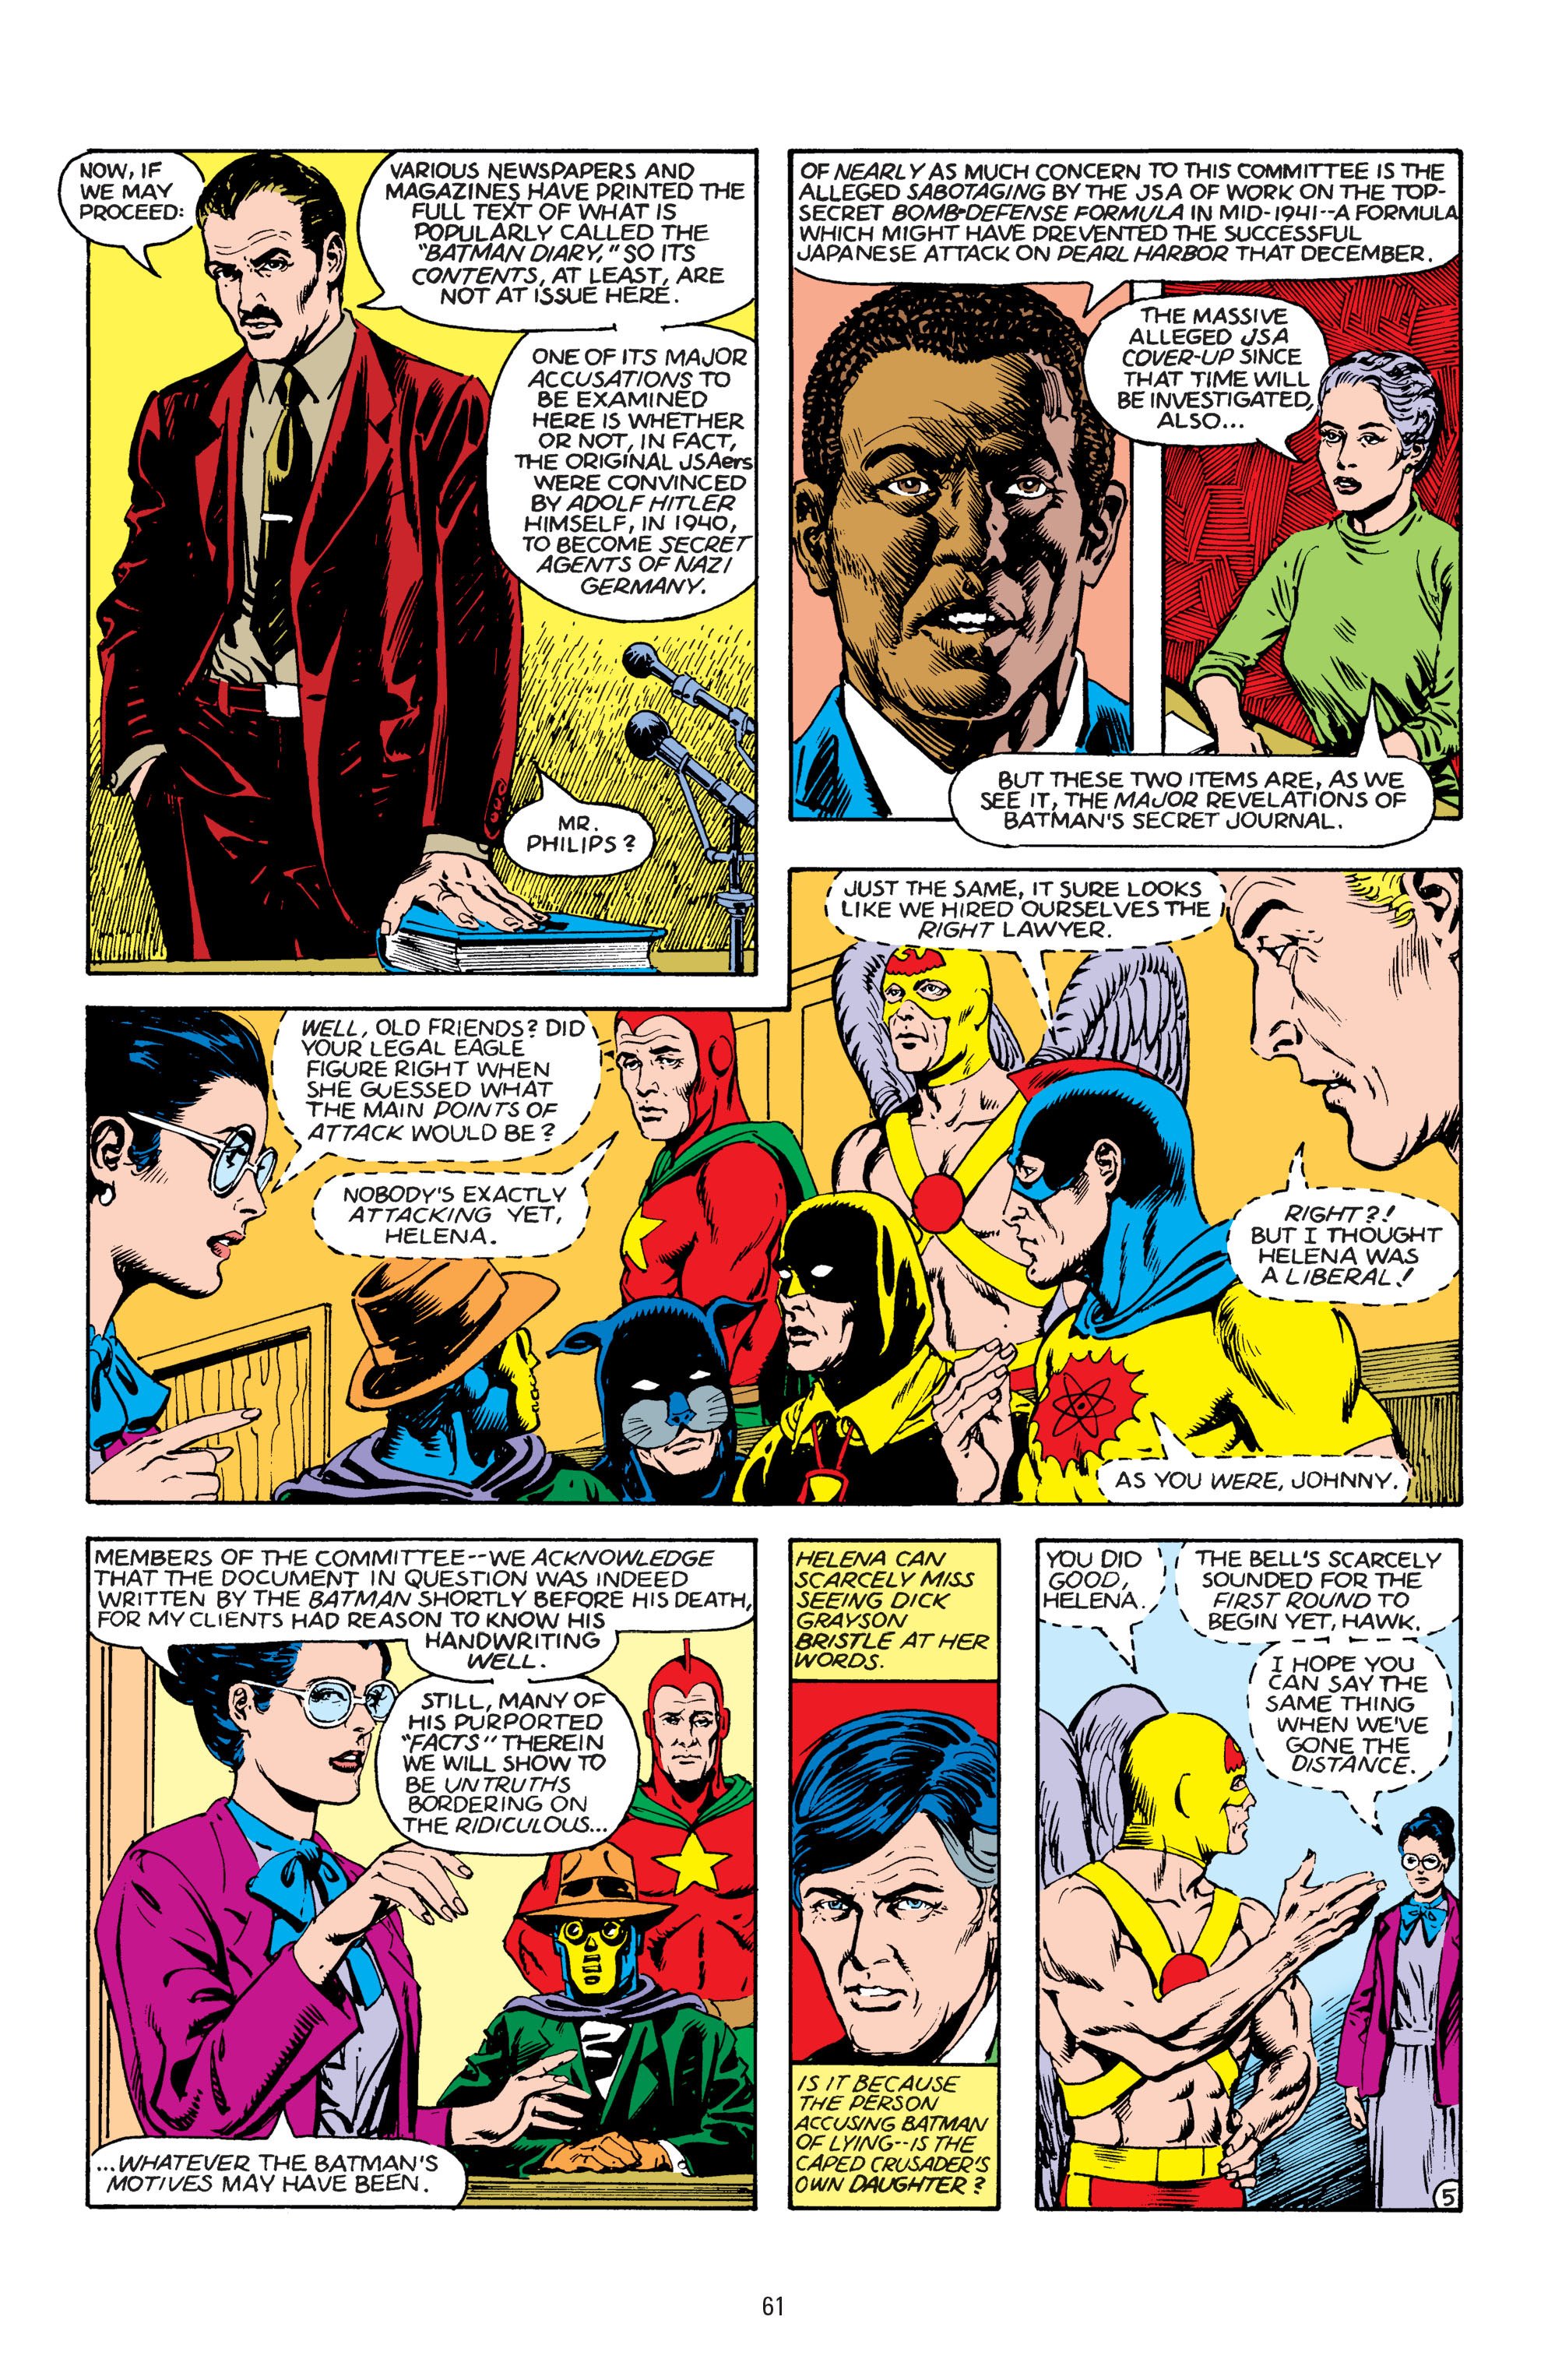 Read online America vs. the Justice Society comic -  Issue # TPB - 59